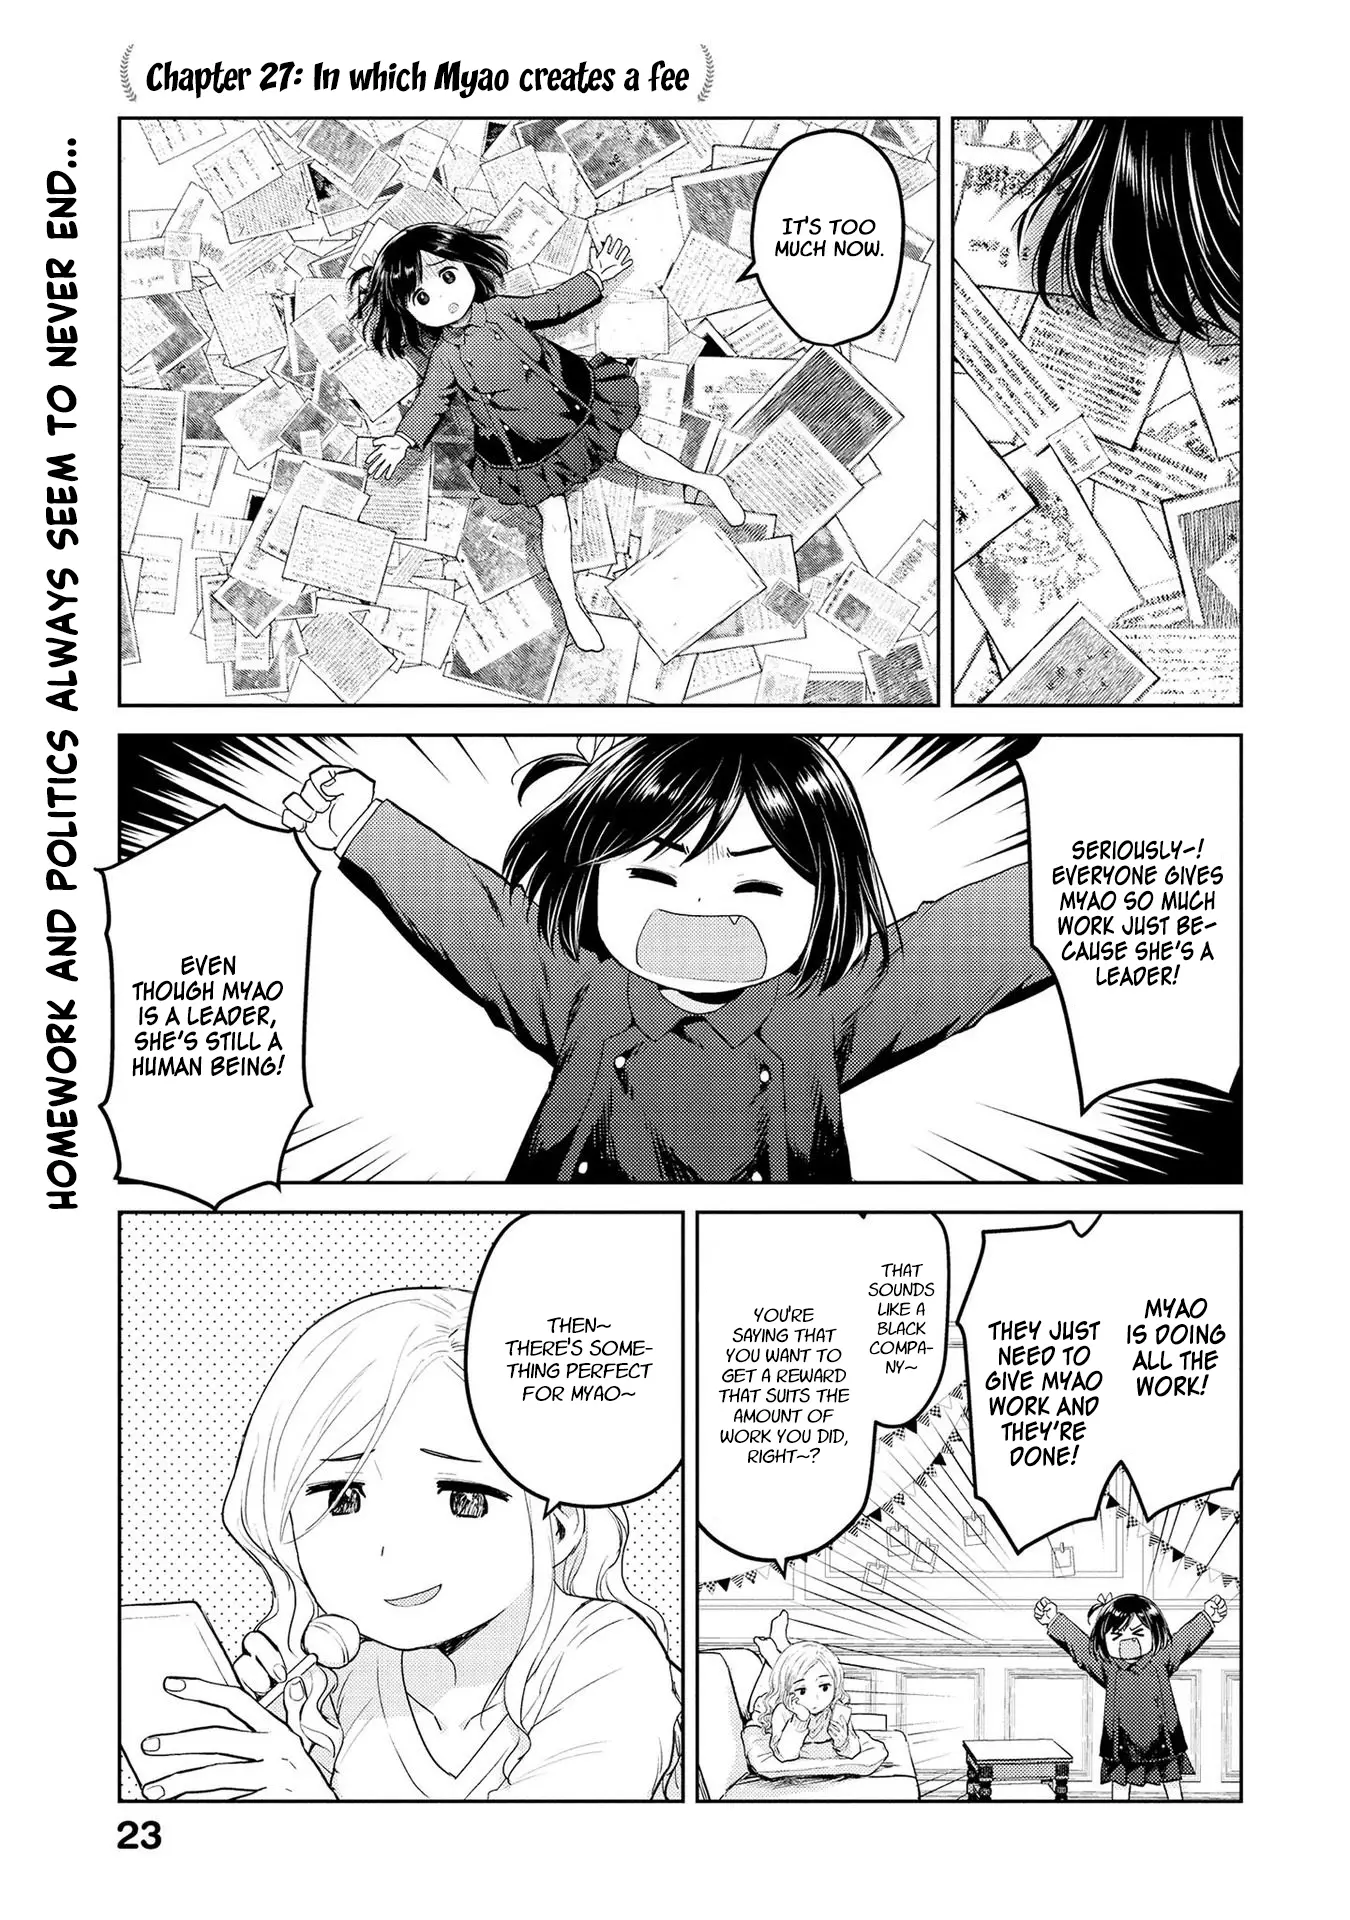 Oh, Our General Myao - 27 page 1